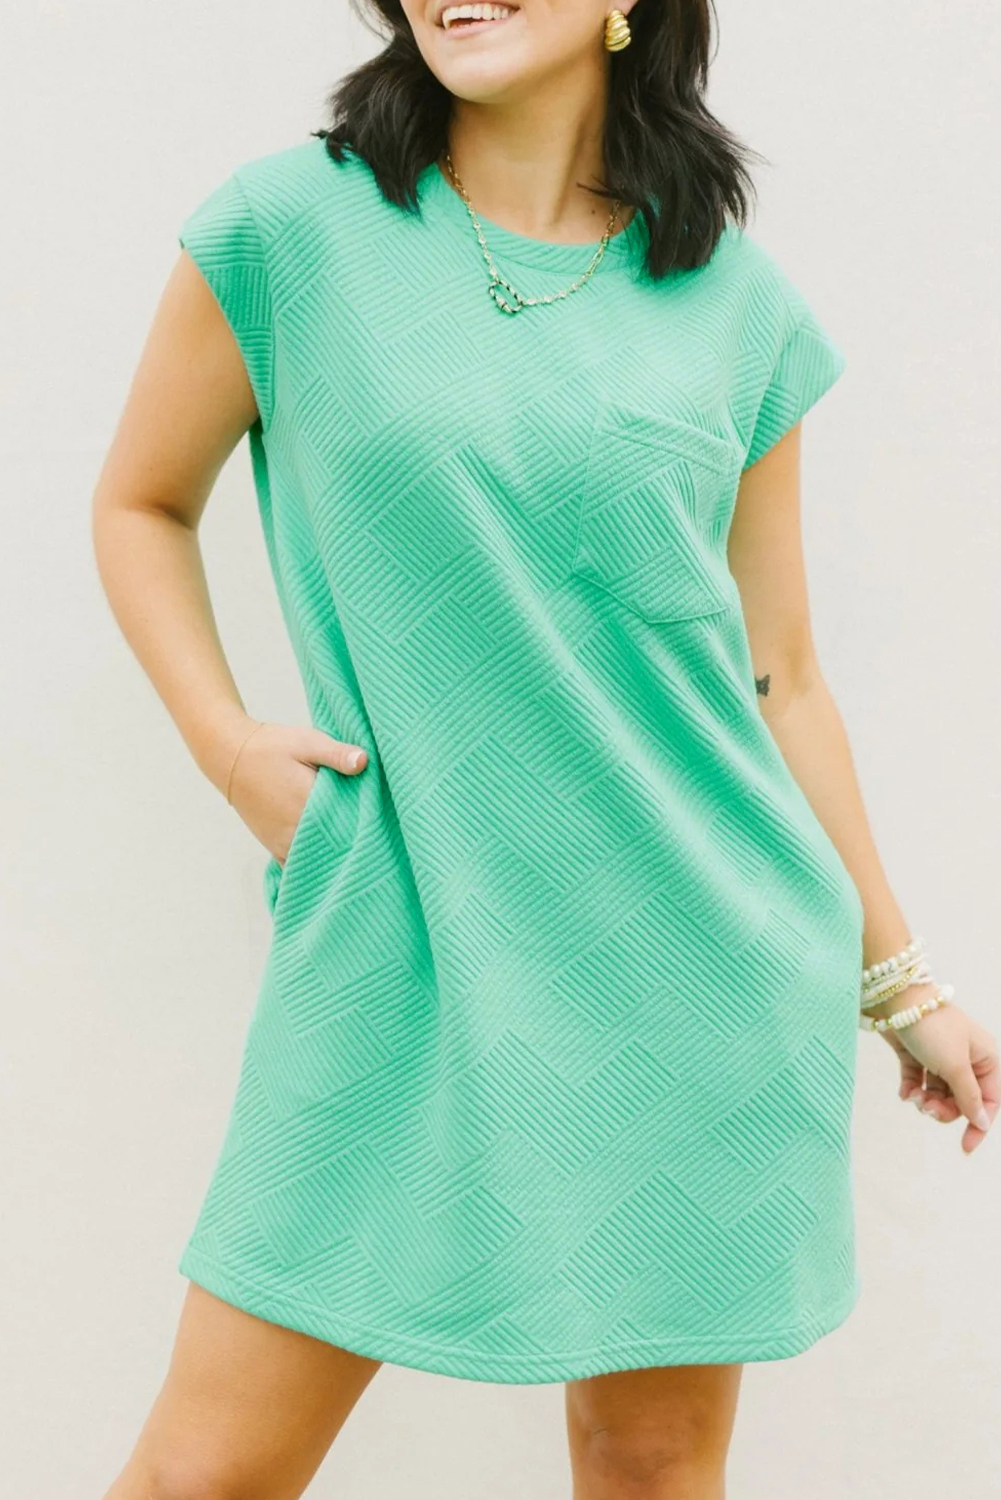 Shewin Wholesale CLOTHING Mint Green Plain Textured Pocketed Mini Dress